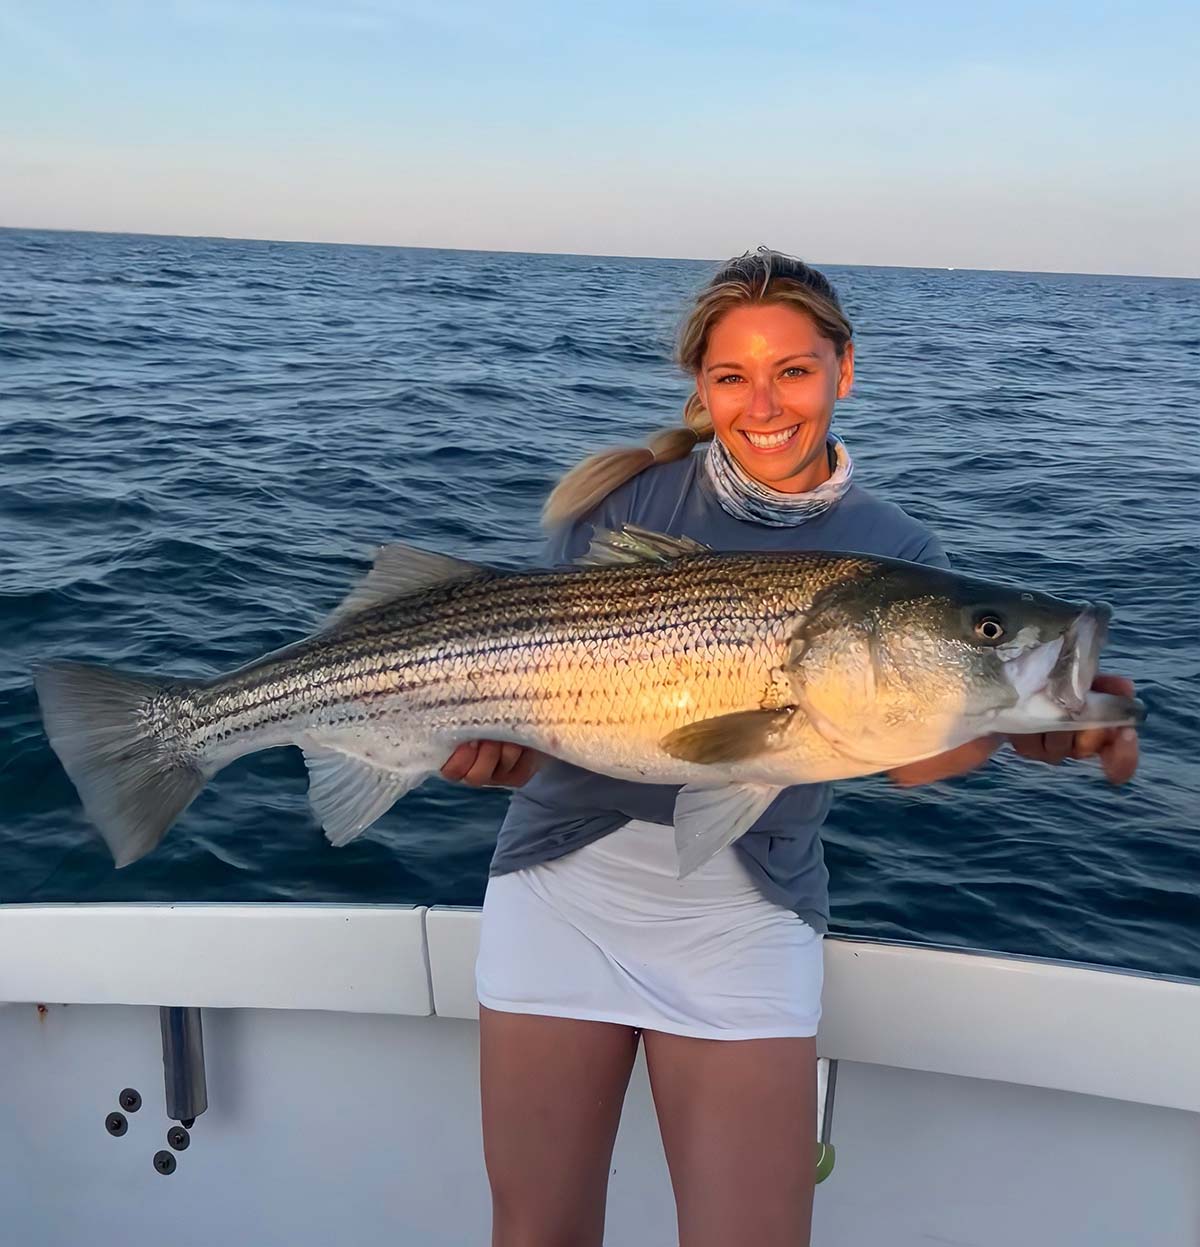 Sudden Change in Striped Bass Slot Limit Set for July